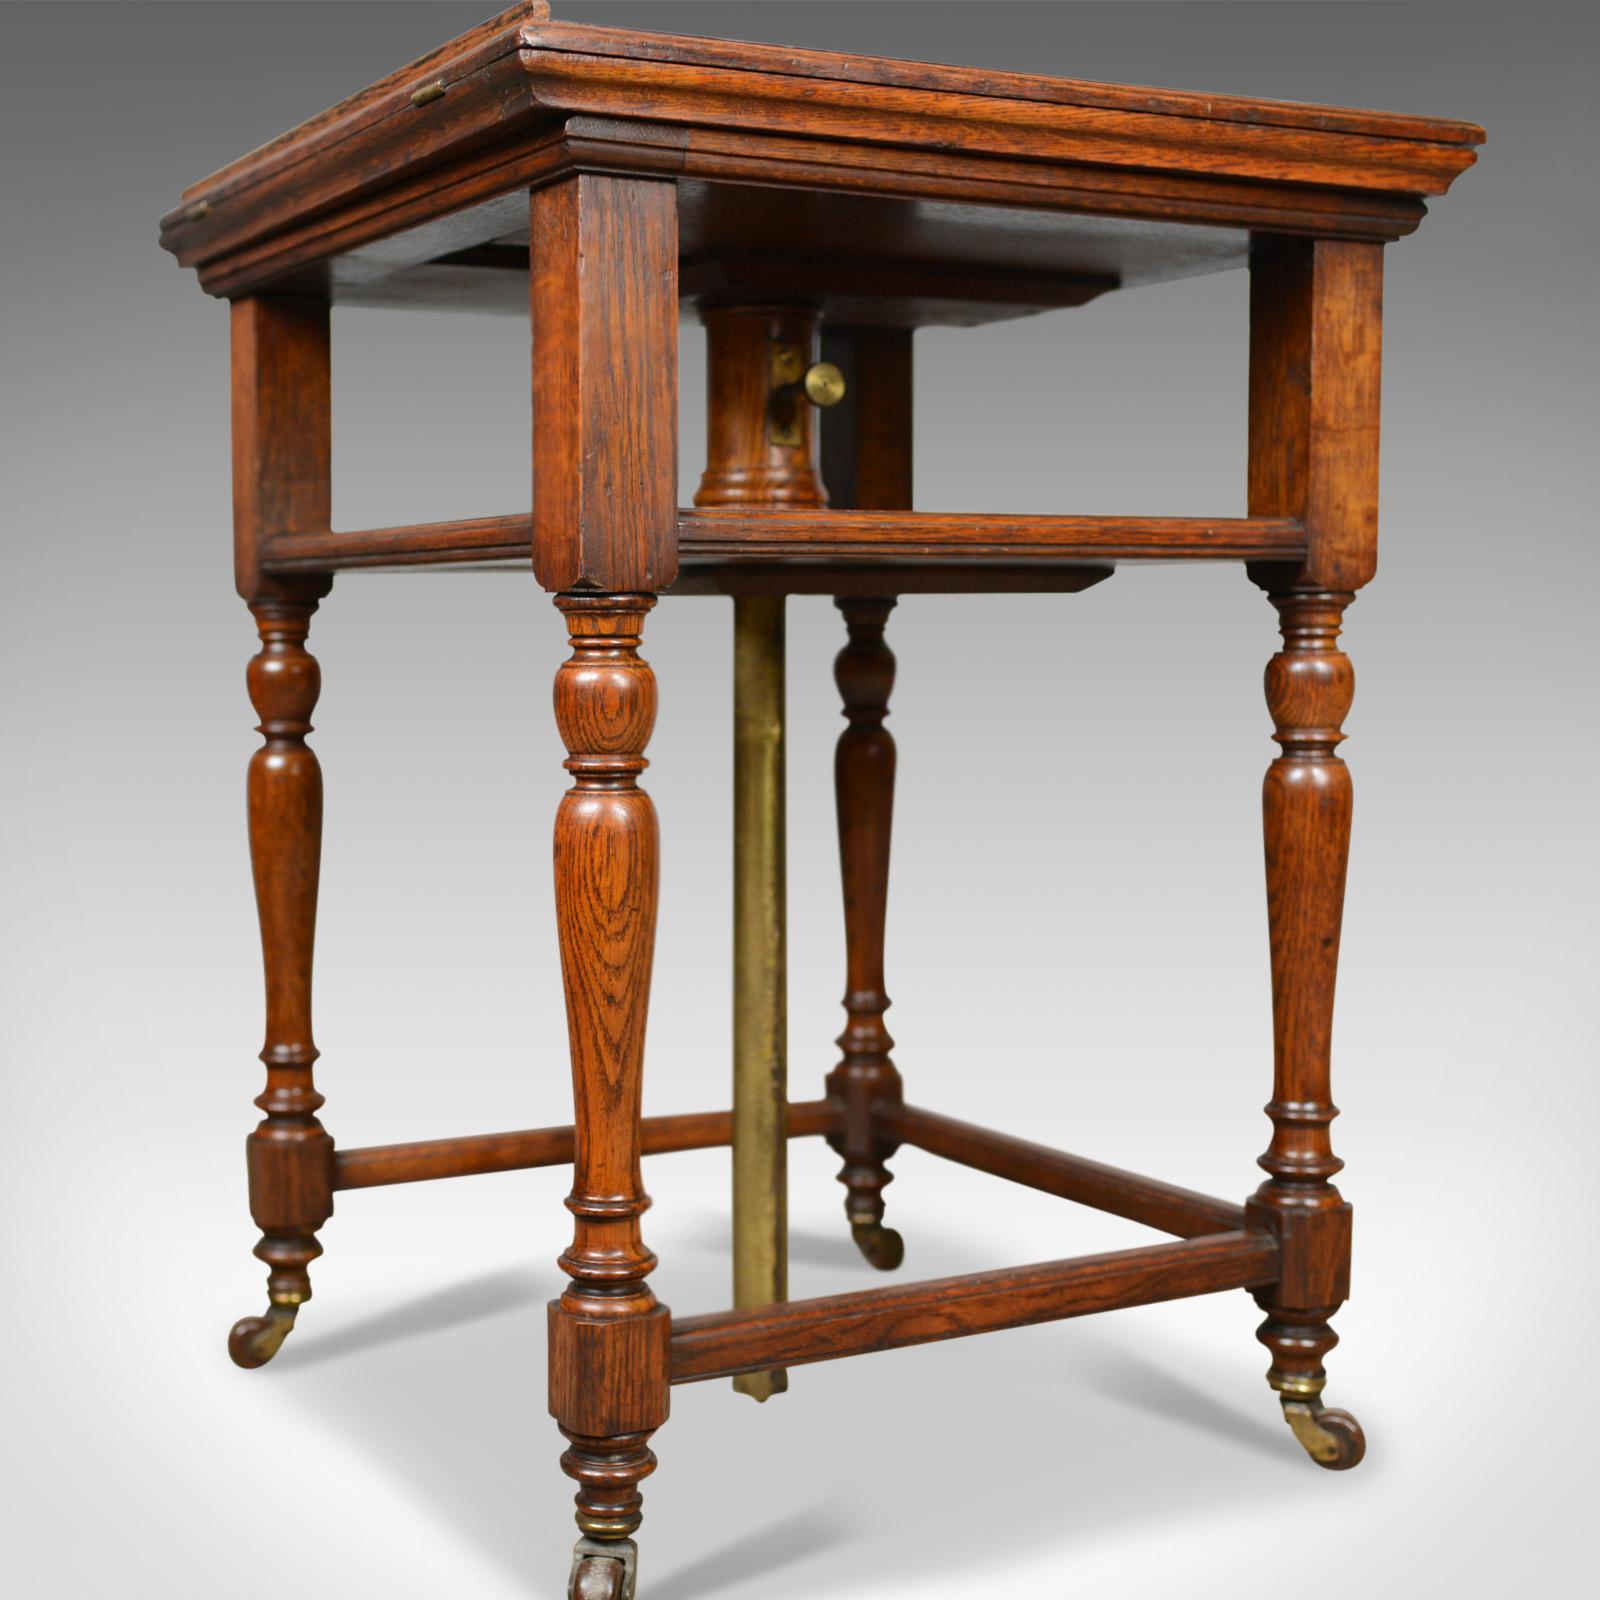 Antique, Metamorphic, Side Table, Lectern, Oak, Library, Reading, circa 1860 4